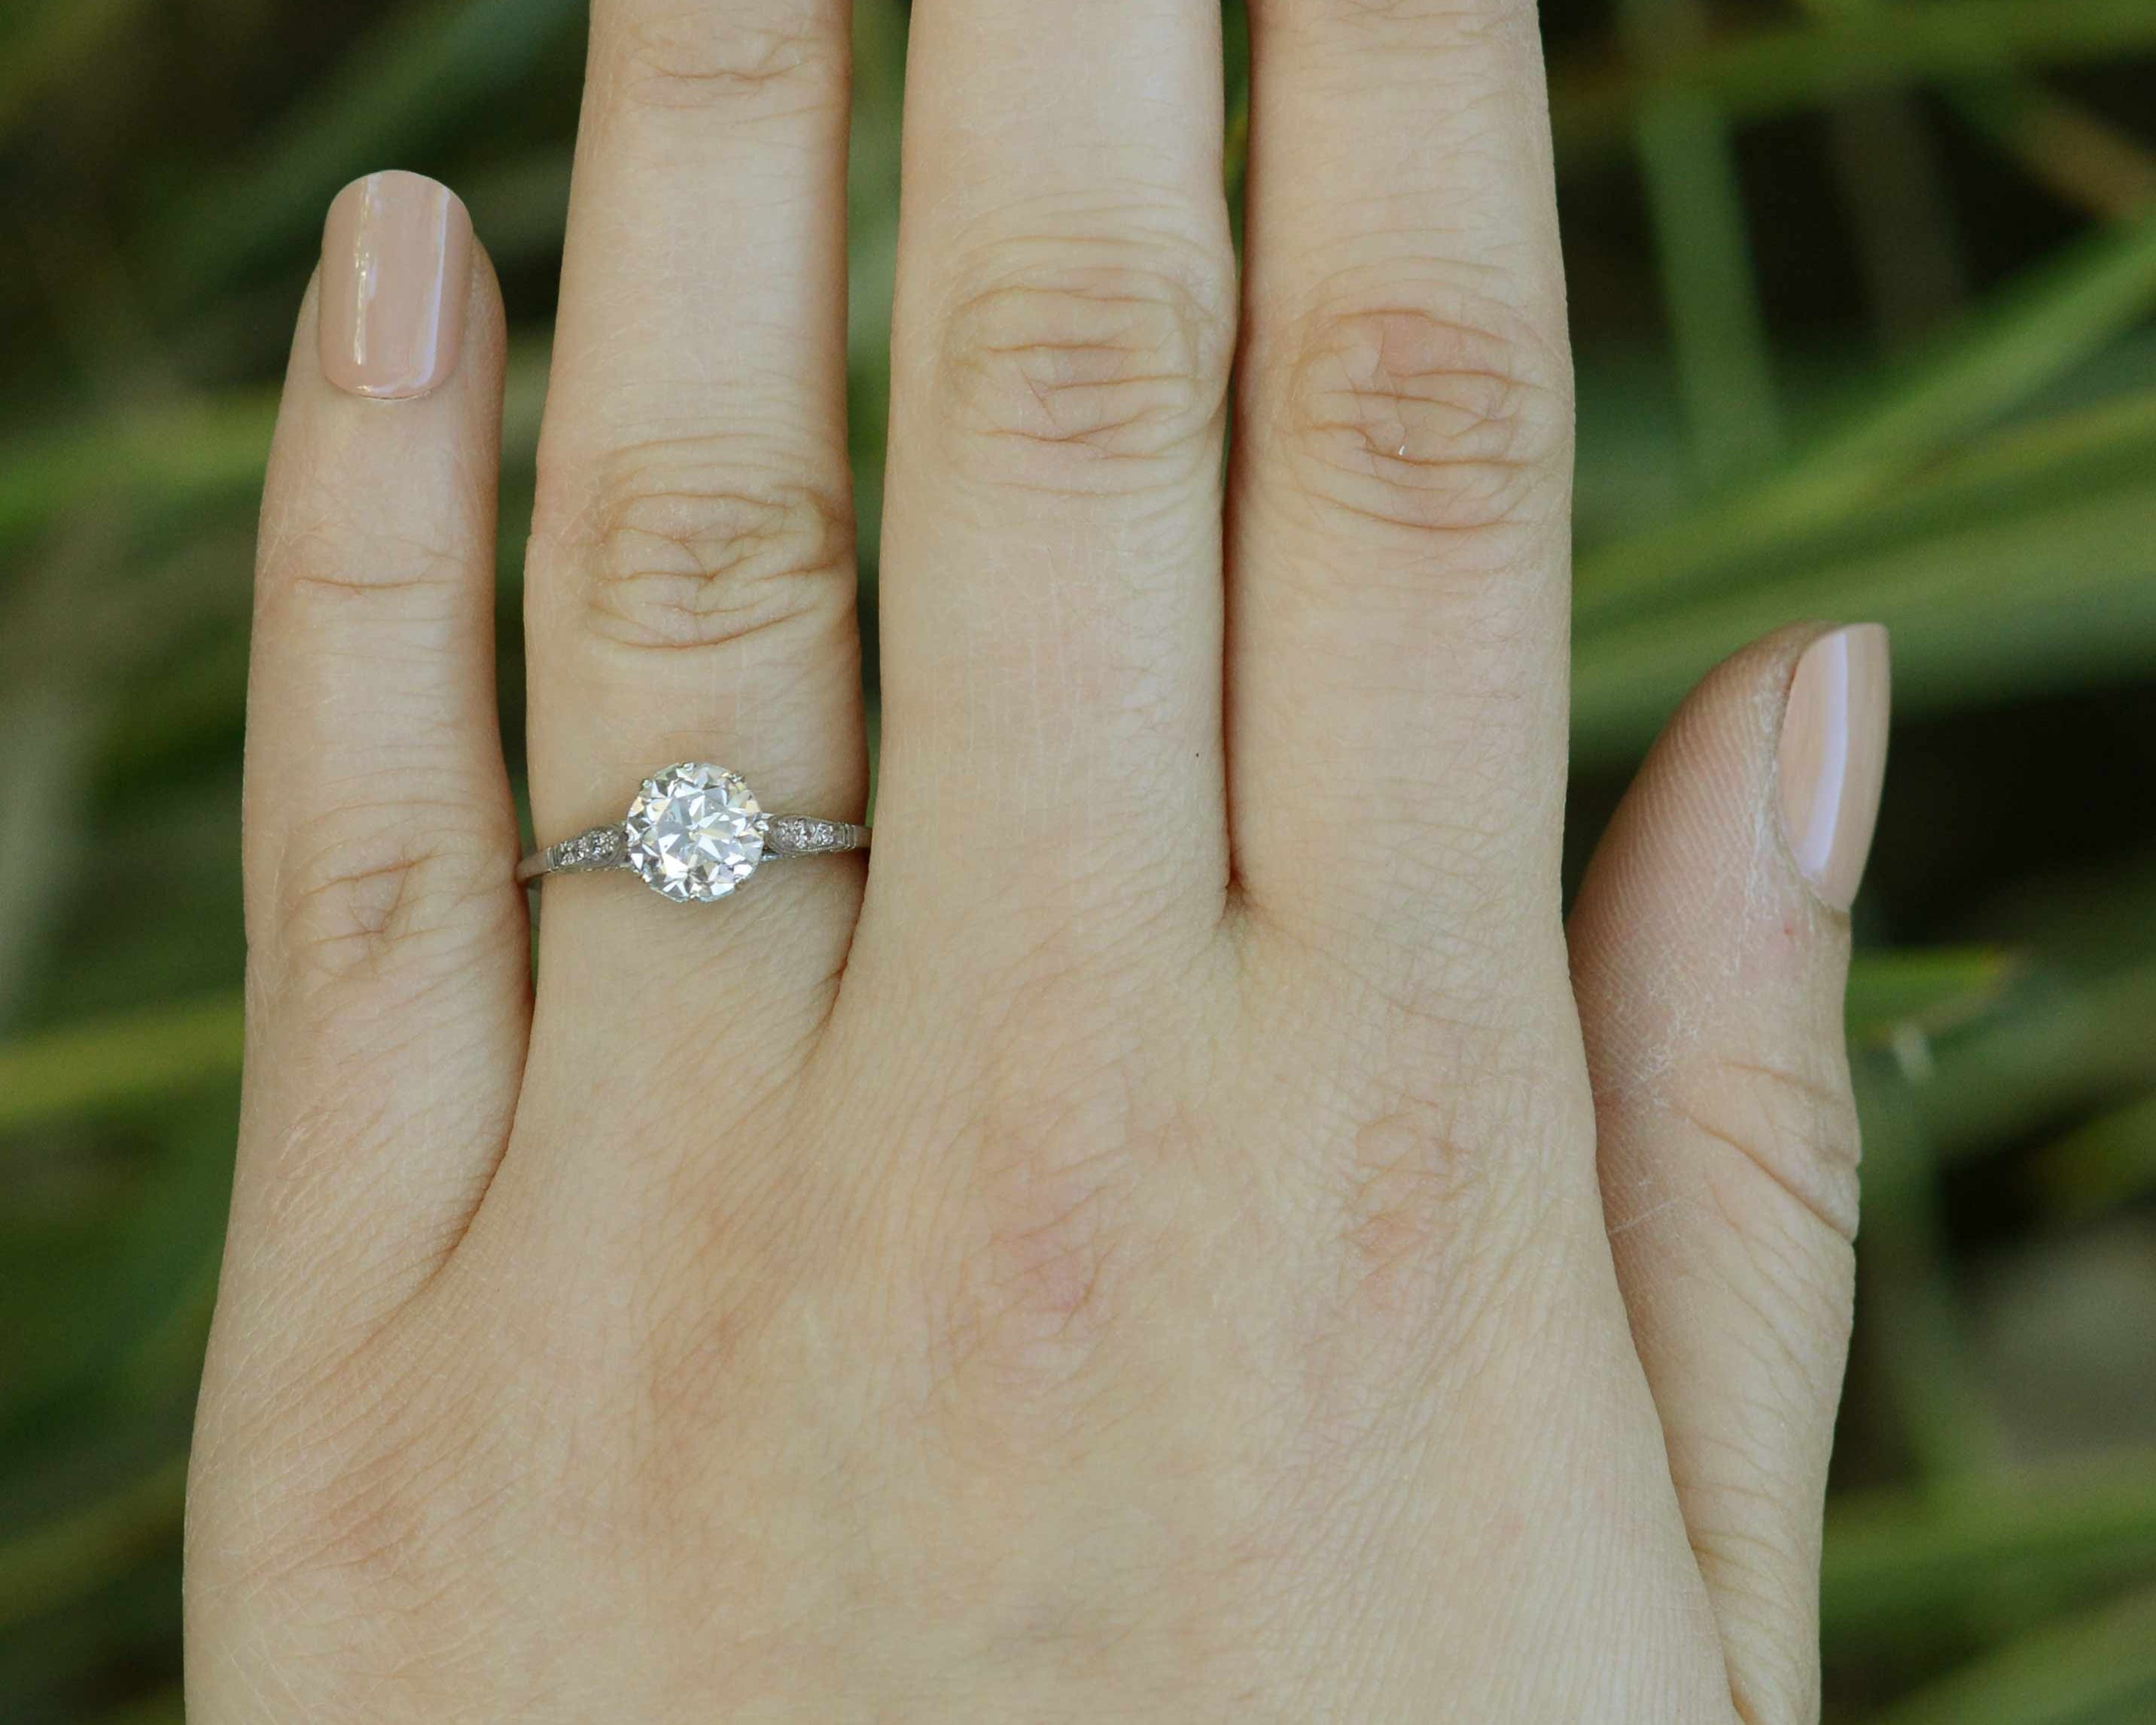 A large one carat diamond engagement ring with accent diamonds on the shoulder and setting.